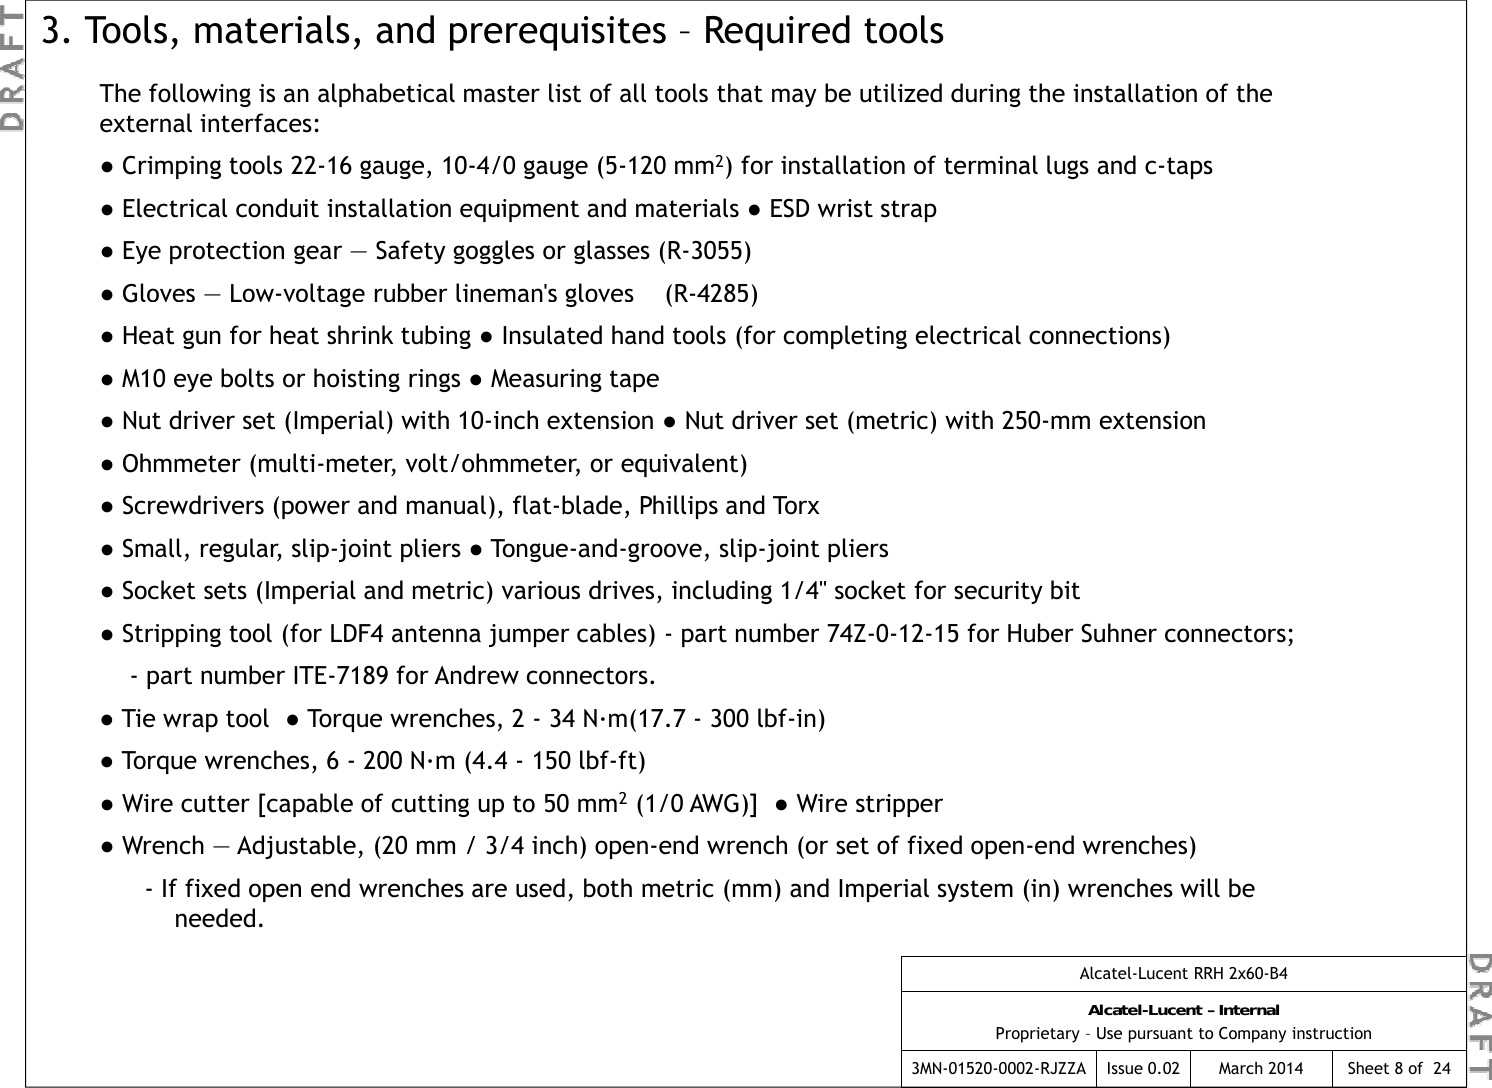 The following is an alphabetical master list of all tools that may be utilized during the installation of the external interfaces:3. Tools, materials, and prerequisites – Required tools●Crimping tools 22-16 gauge, 10-4/0 gauge (5-120 mm2) for installation of terminal lugs and c-taps●Electrical conduit installation equipment and materials ●ESD wrist strap  ●Eye protection gear — Safety goggles or glasses (R-3055) ●Gloves —Low-voltage rubber lineman&apos;s gloves    (R-4285)  Ggg()●Heat gun for heat shrink tubing ●Insulated hand tools (for completing electrical connections) ●M10 eye bolts or hoisting rings ●Measuring tape  ●Nut driver set (Imperial) with 10-inch extension ●Nut driver set (metric) with 250-mm extension●Ohmmeter (multimeter  volt/ohmmeter  or equivalent) ●Ohmmeter (multi-meter, volt/ohmmeter, or equivalent) ●Screwdrivers (power and manual), flat-blade, Phillips and Torx●Small, regular, slip-joint pliers ●Tongue-and-groove, slip-joint pliers●Socket sets (Imperial and metric) various drives, including 1/4&quot; socket for security bit●Stripping tool (for LDF4 antenna jumper cables) - part number 74Z-0-12-15 for Huber Suhner connectors; - part number ITE-7189 for Andrew connectors.●Tie wrap tool  ●Torque wrenches, 2 - 34 N·m(17.7 - 300 lbf-in) ●Torque wrenches, 6 - 200 N·m (4.4 - 150 lbf-ft)●Wire cutter [capable of cutting up to 50 mm2(1/0 AWG)]  ●Wire stripper●Wrench — Adjustable, (20 mm / 3/4 inch) open-end wrench (or set of fixed open-end wrenches)- If fixed open end wrenches are used, both metric (mm) and Imperial system (in) wrenches will be needed.Alcatel-Lucent RRH 2x60-B4Alcatel-Lucent – InternalProprietary – Use pursuant to Company instruction3MN-01520-0002-RJZZA Issue 0.02 March 2014 Sheet 8 of  24